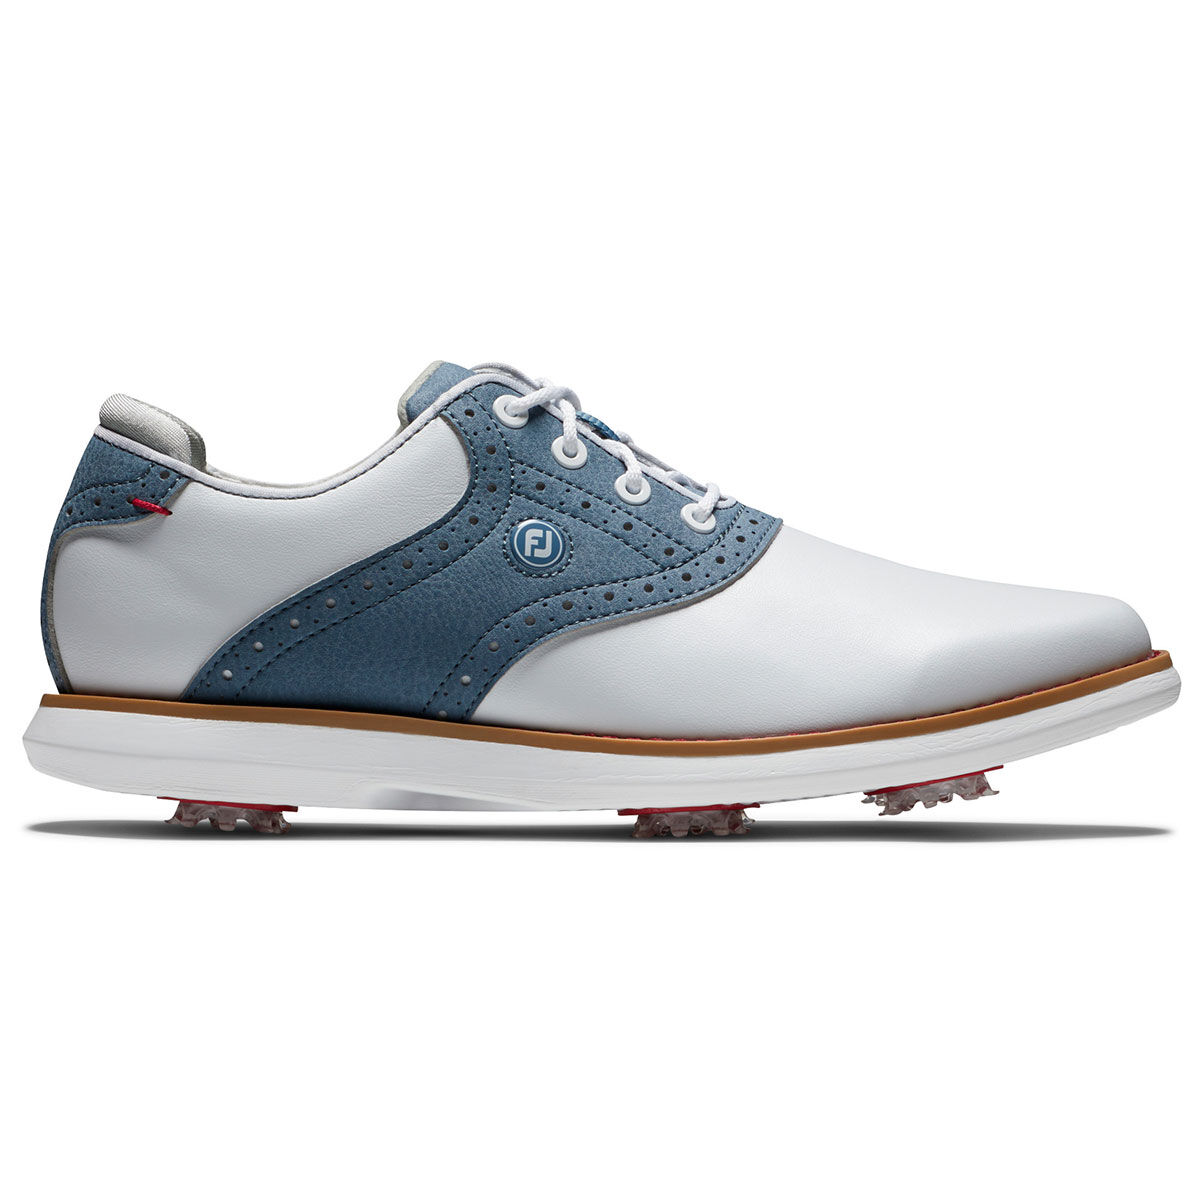 Chaussures FootJoy Traditions pour femmes, femme, 5, Blanc/Marine, Large | Online Golf